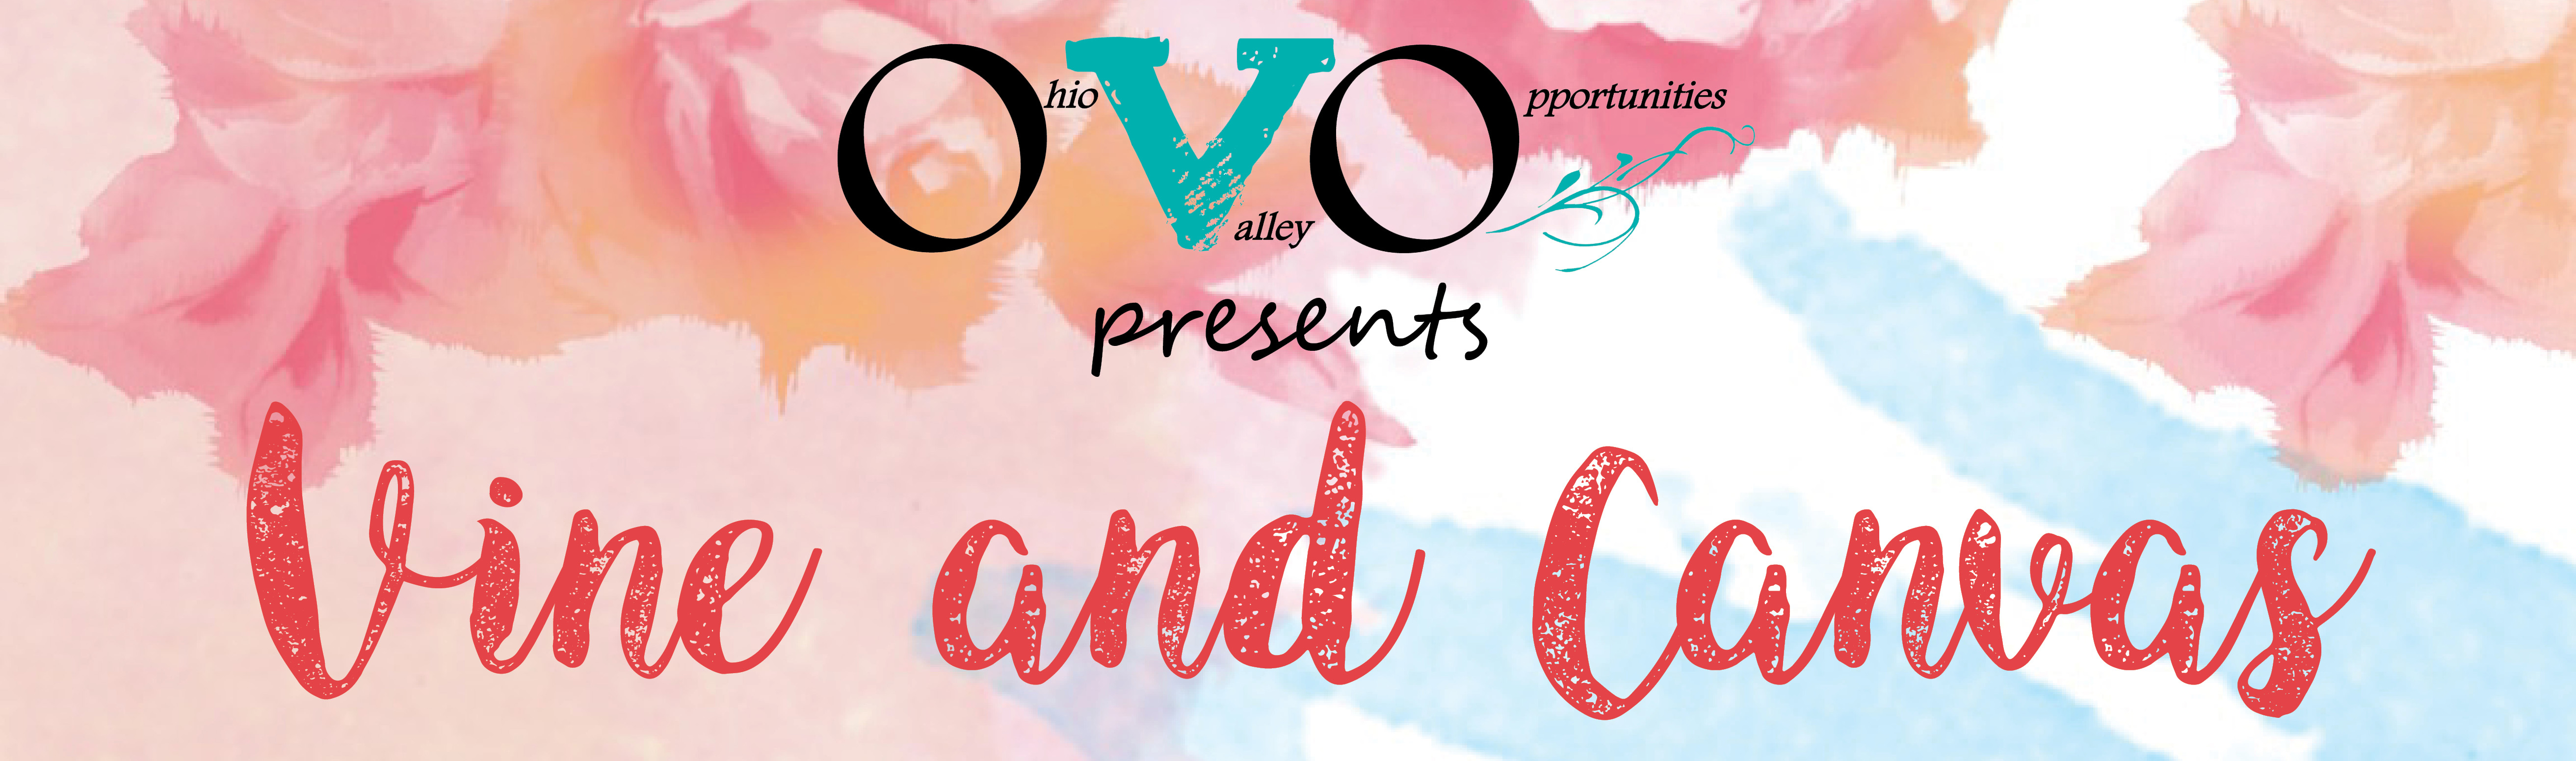 Vine and Canvas Banner